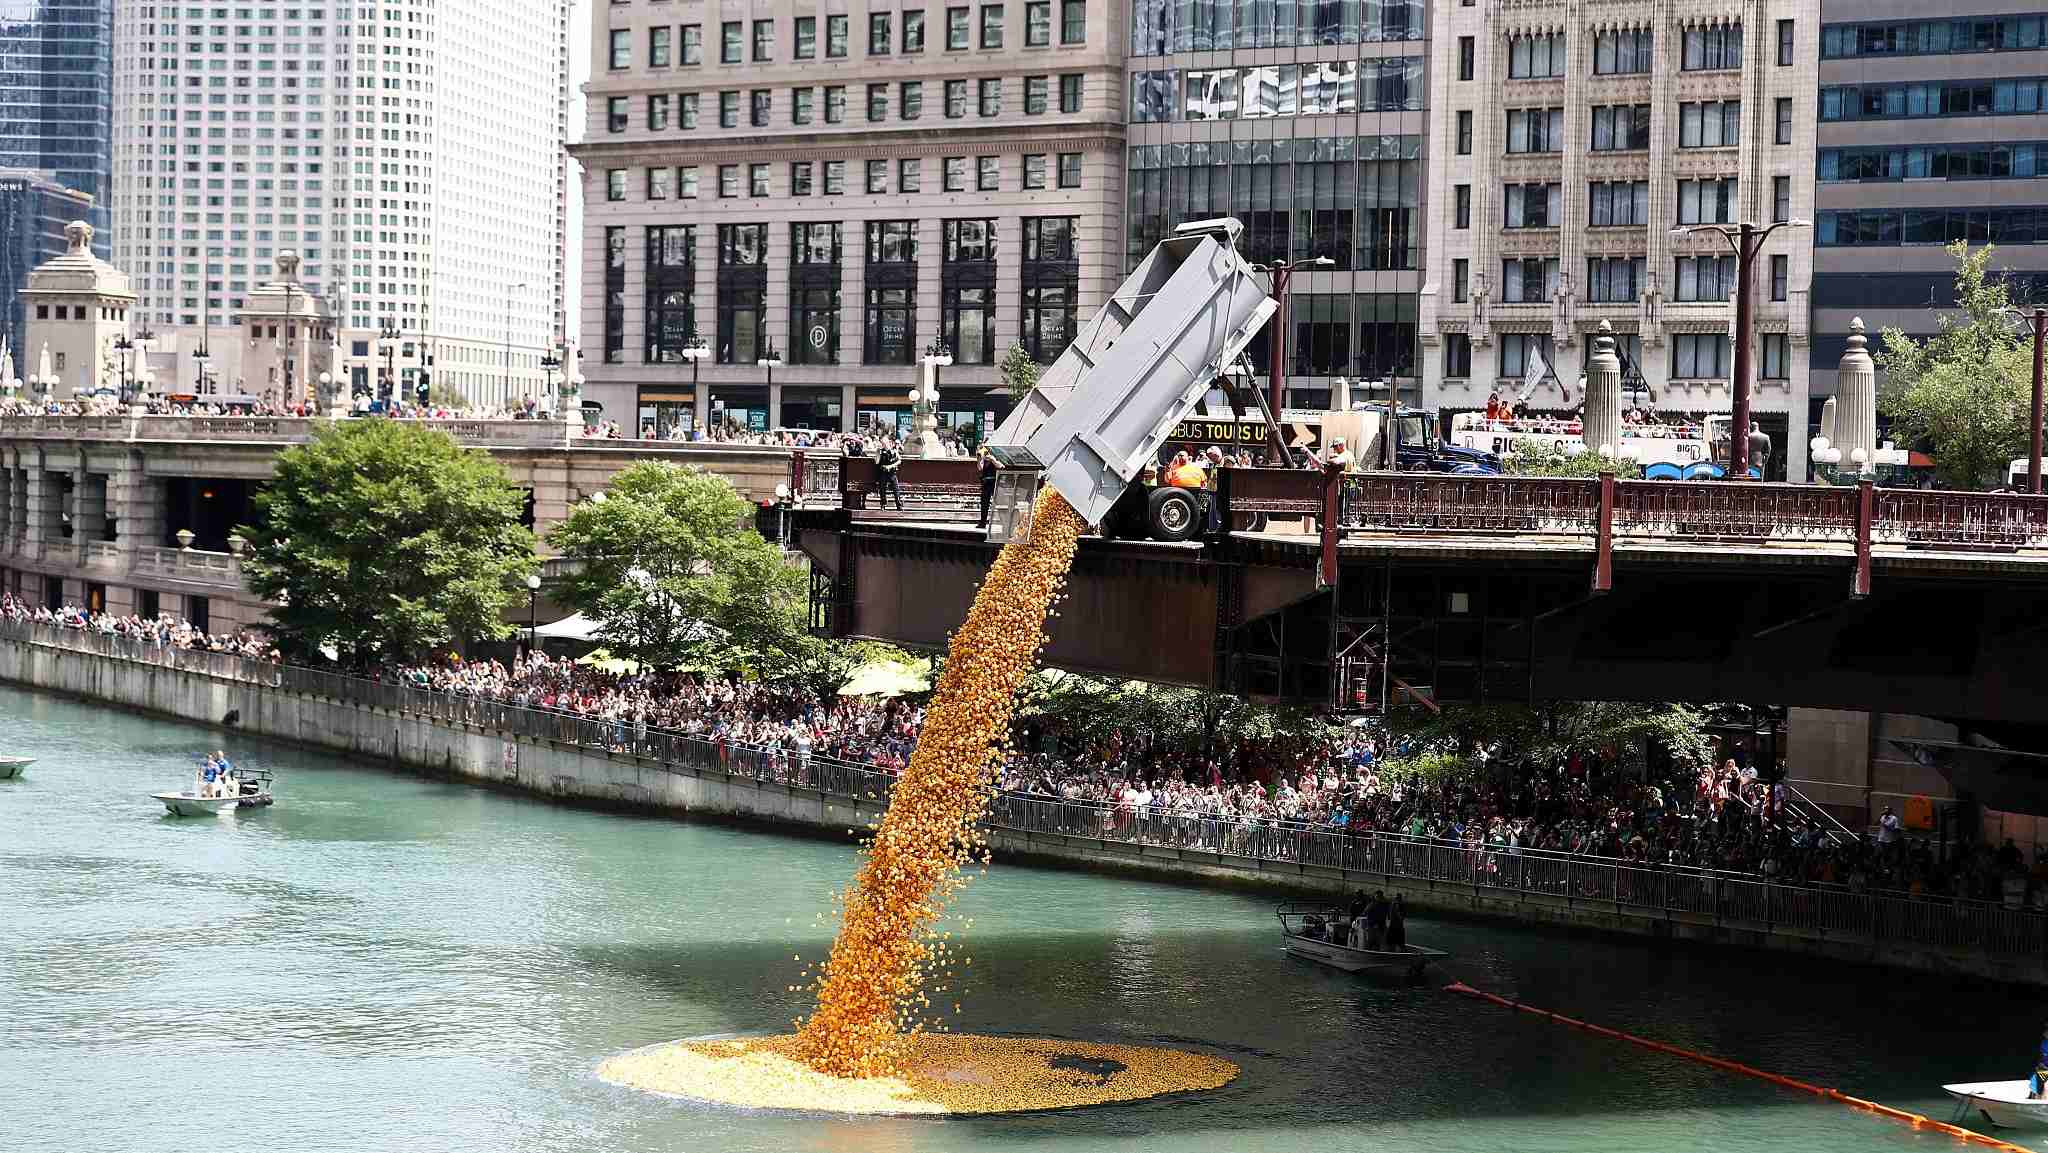 Over 60,000 rubber ducks make a splash in Chicago River for charity CGTN